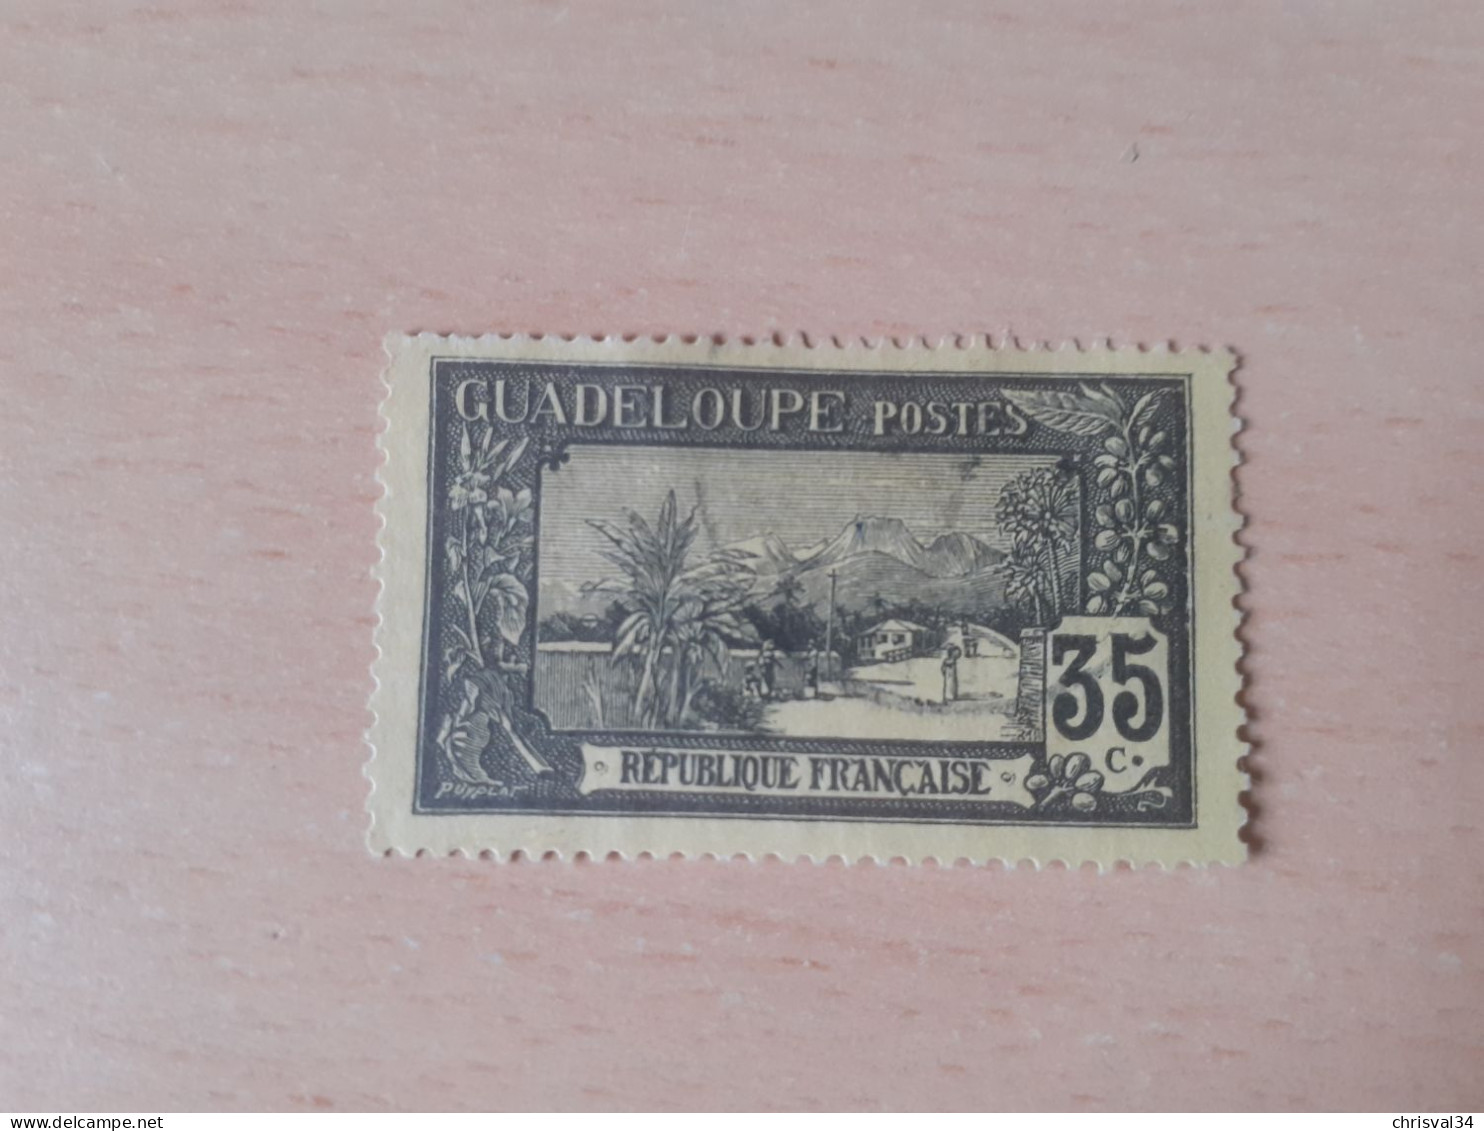 TIMBRE   GUADELOUPE       N  64     COTE  1,00   EUROS  NEUF  SG - Ungebraucht